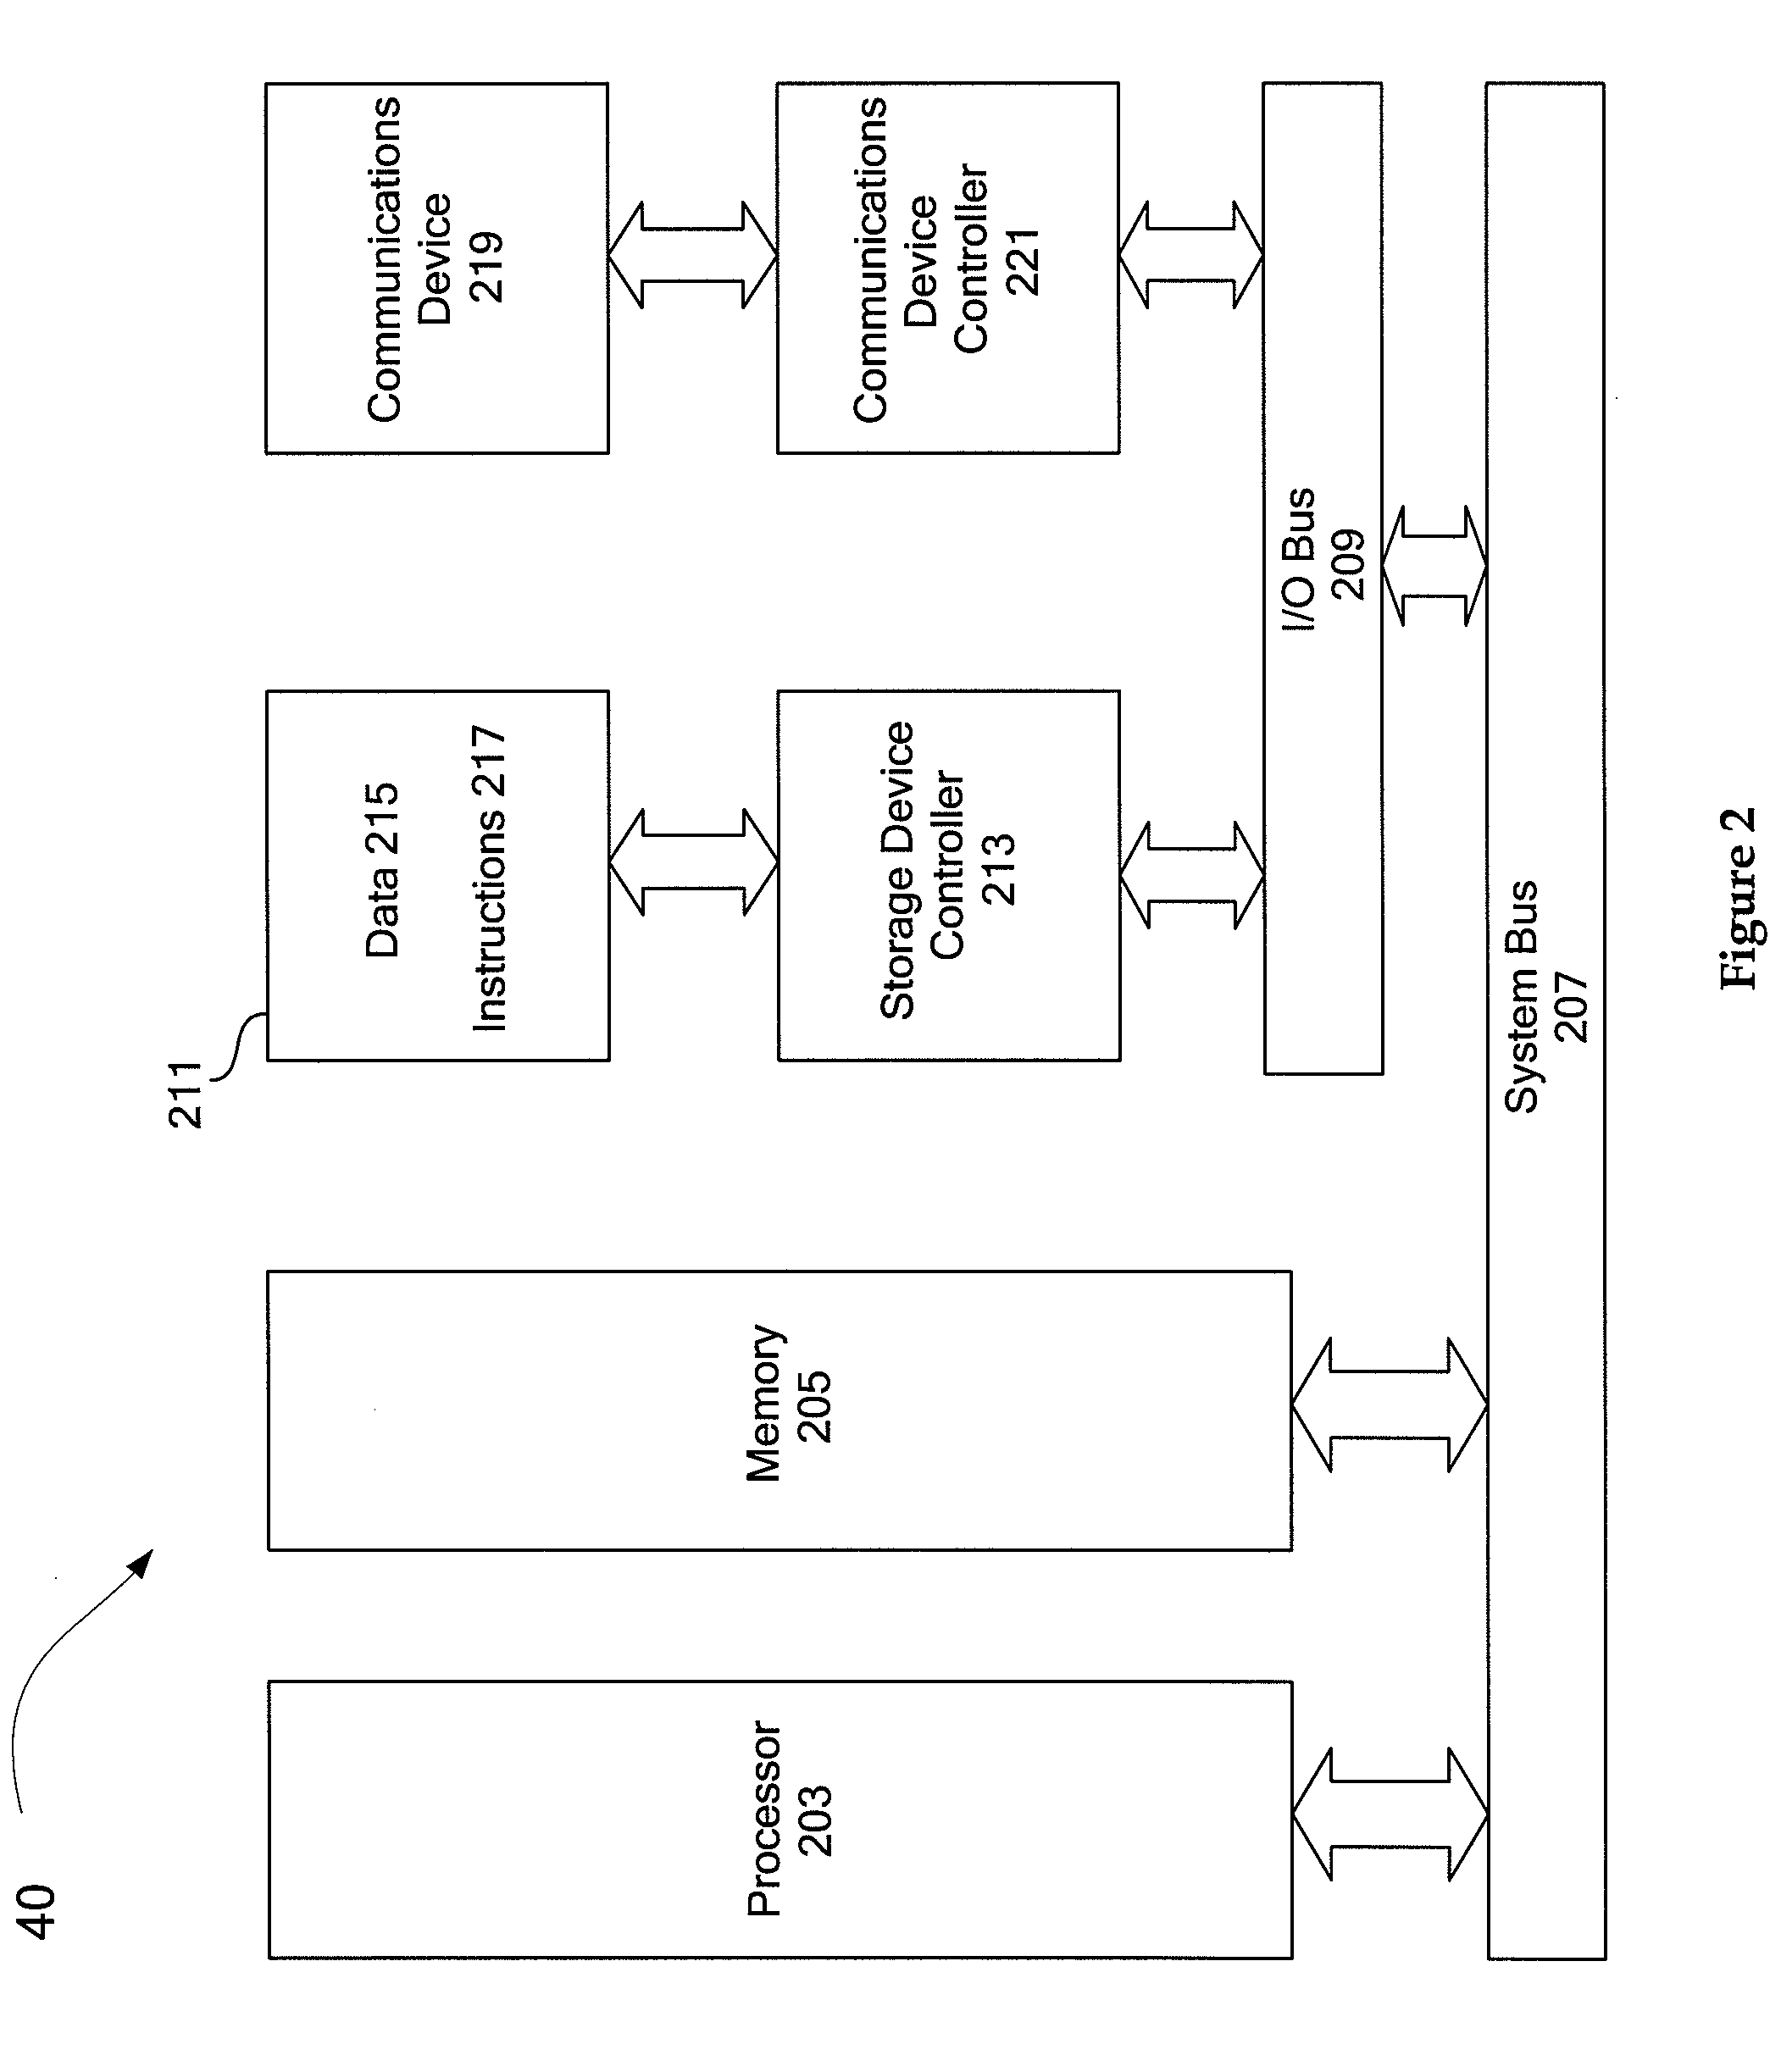 Generating an interim connection space for spectral data